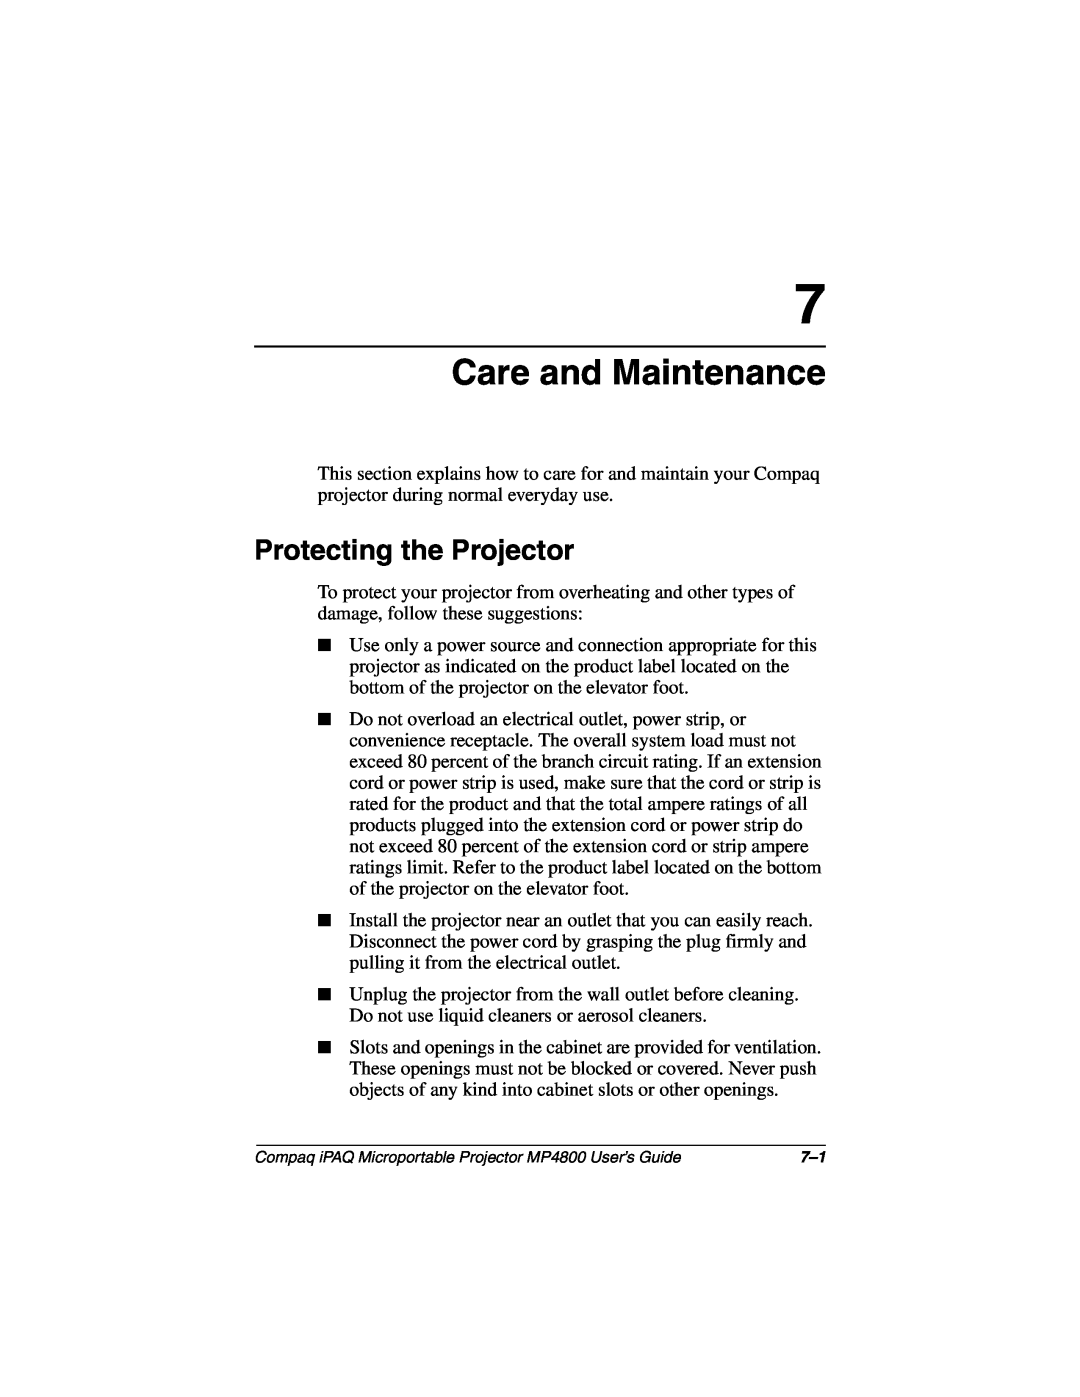 Compaq MP4800 manual Care and Maintenance, Protecting the Projector 